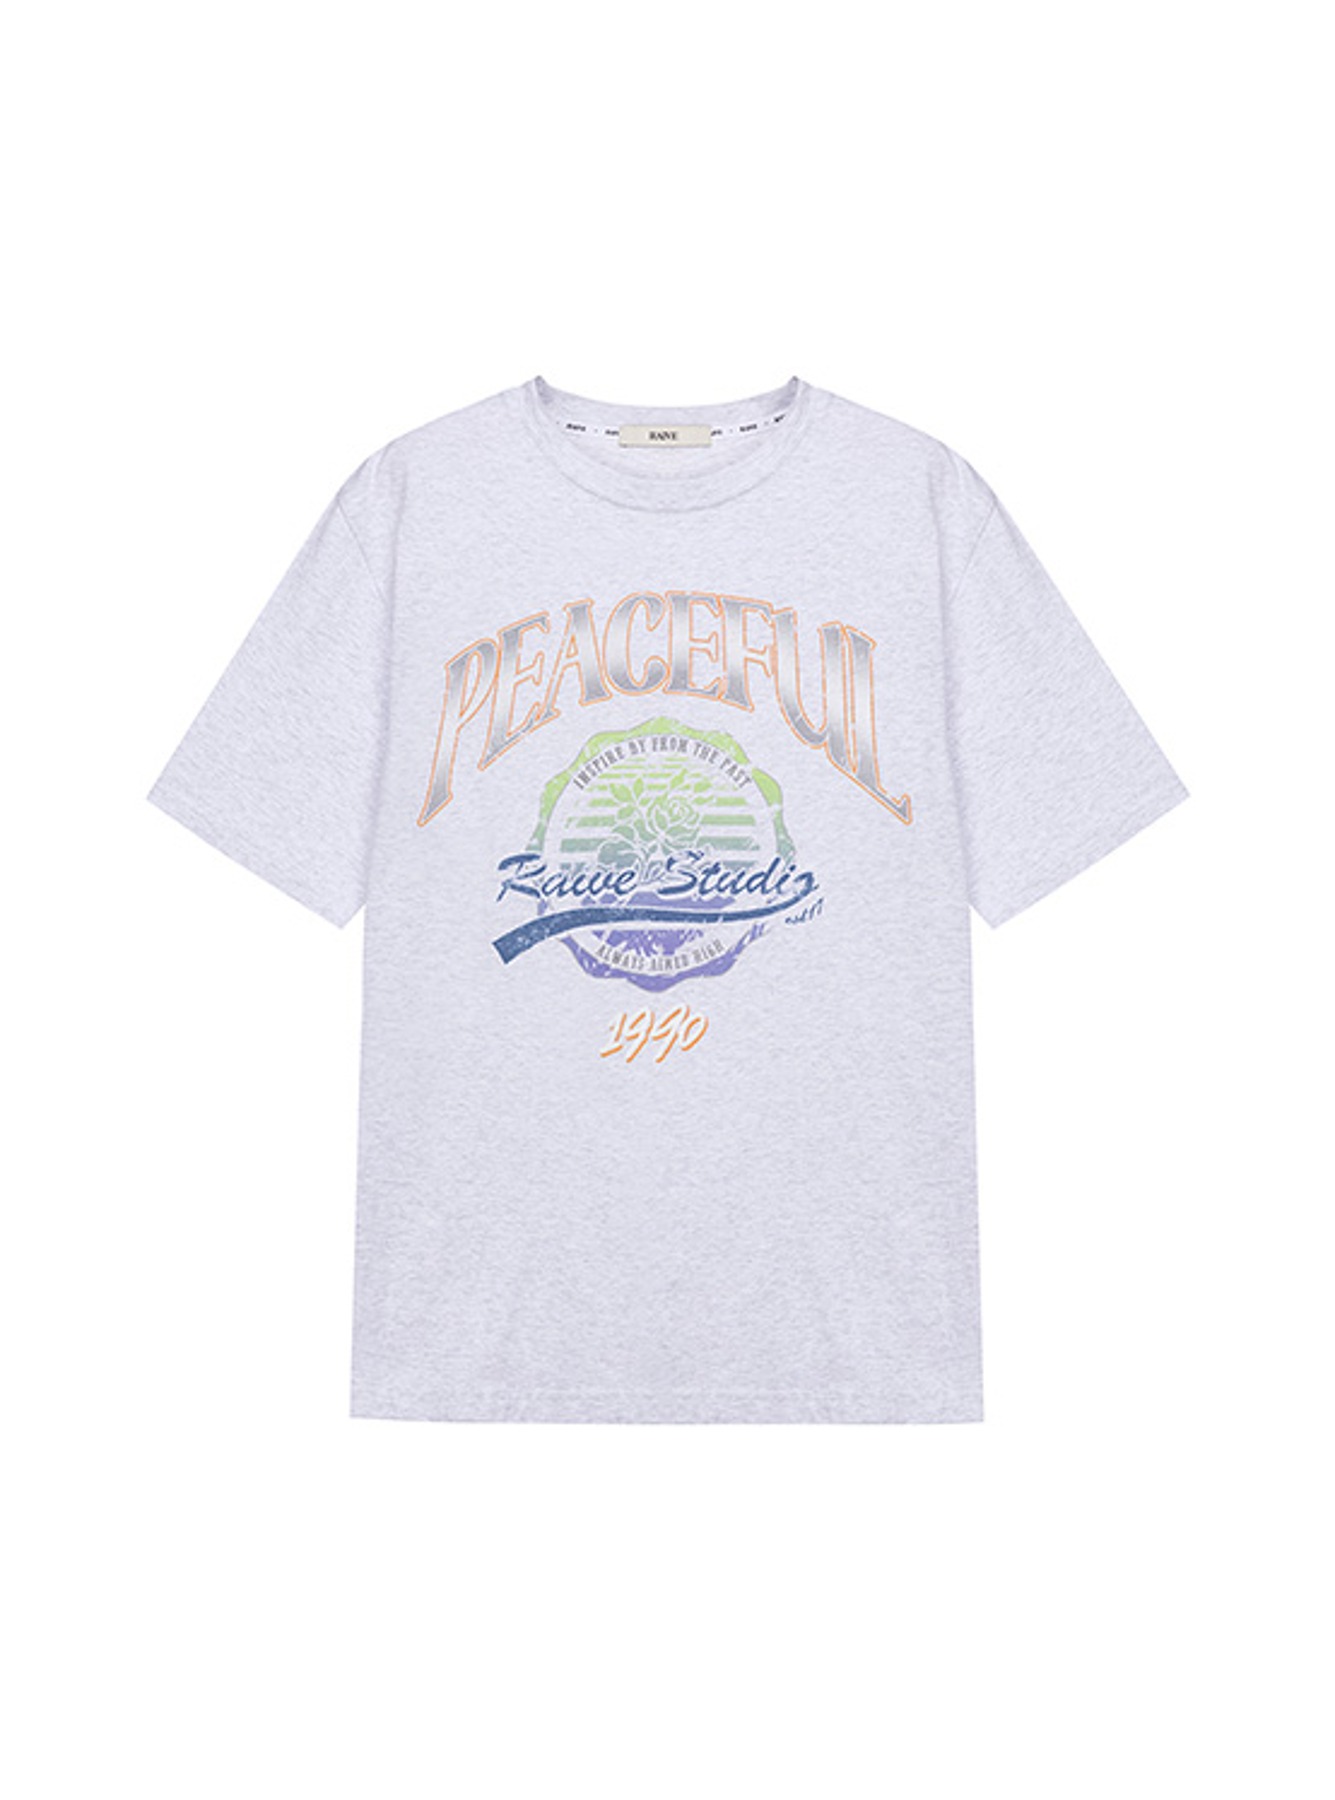 PEACEFUL Graphic T-Shirt in M/Grey VW4SE026-1F